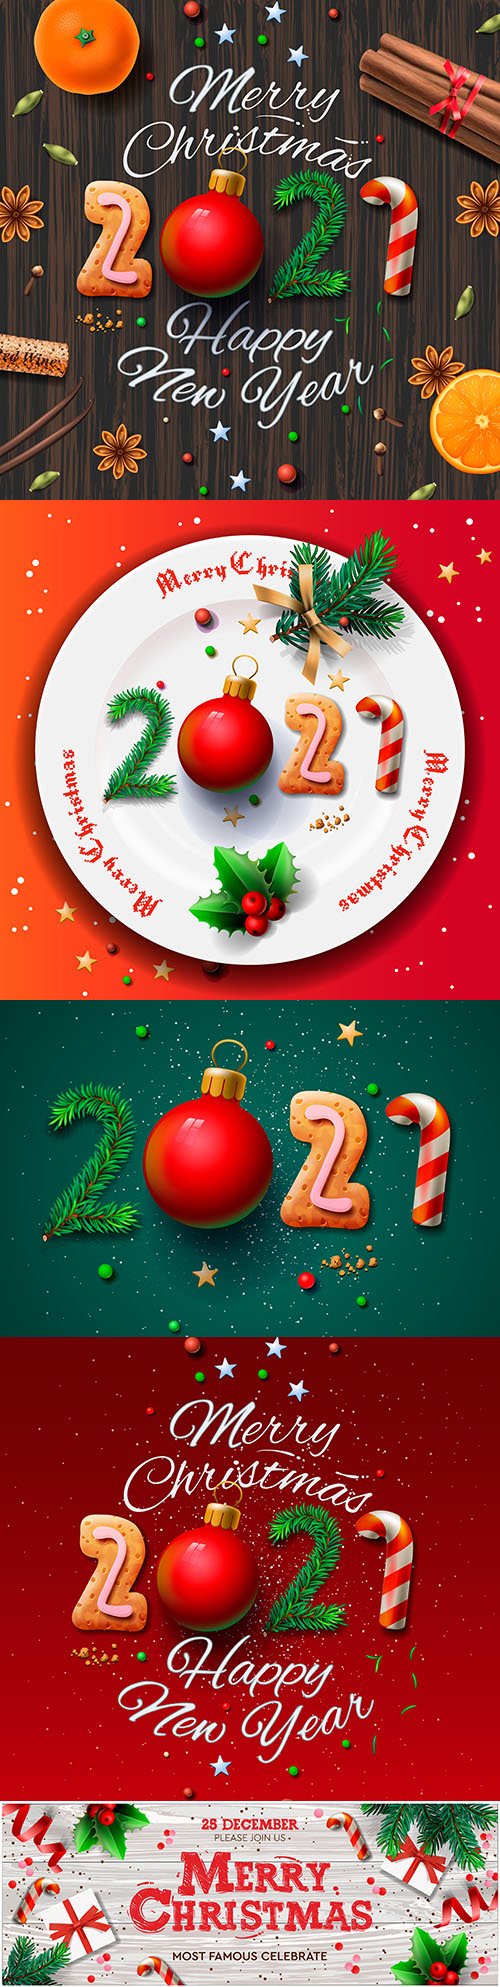 Greeting card for Christmas and New Year 2021